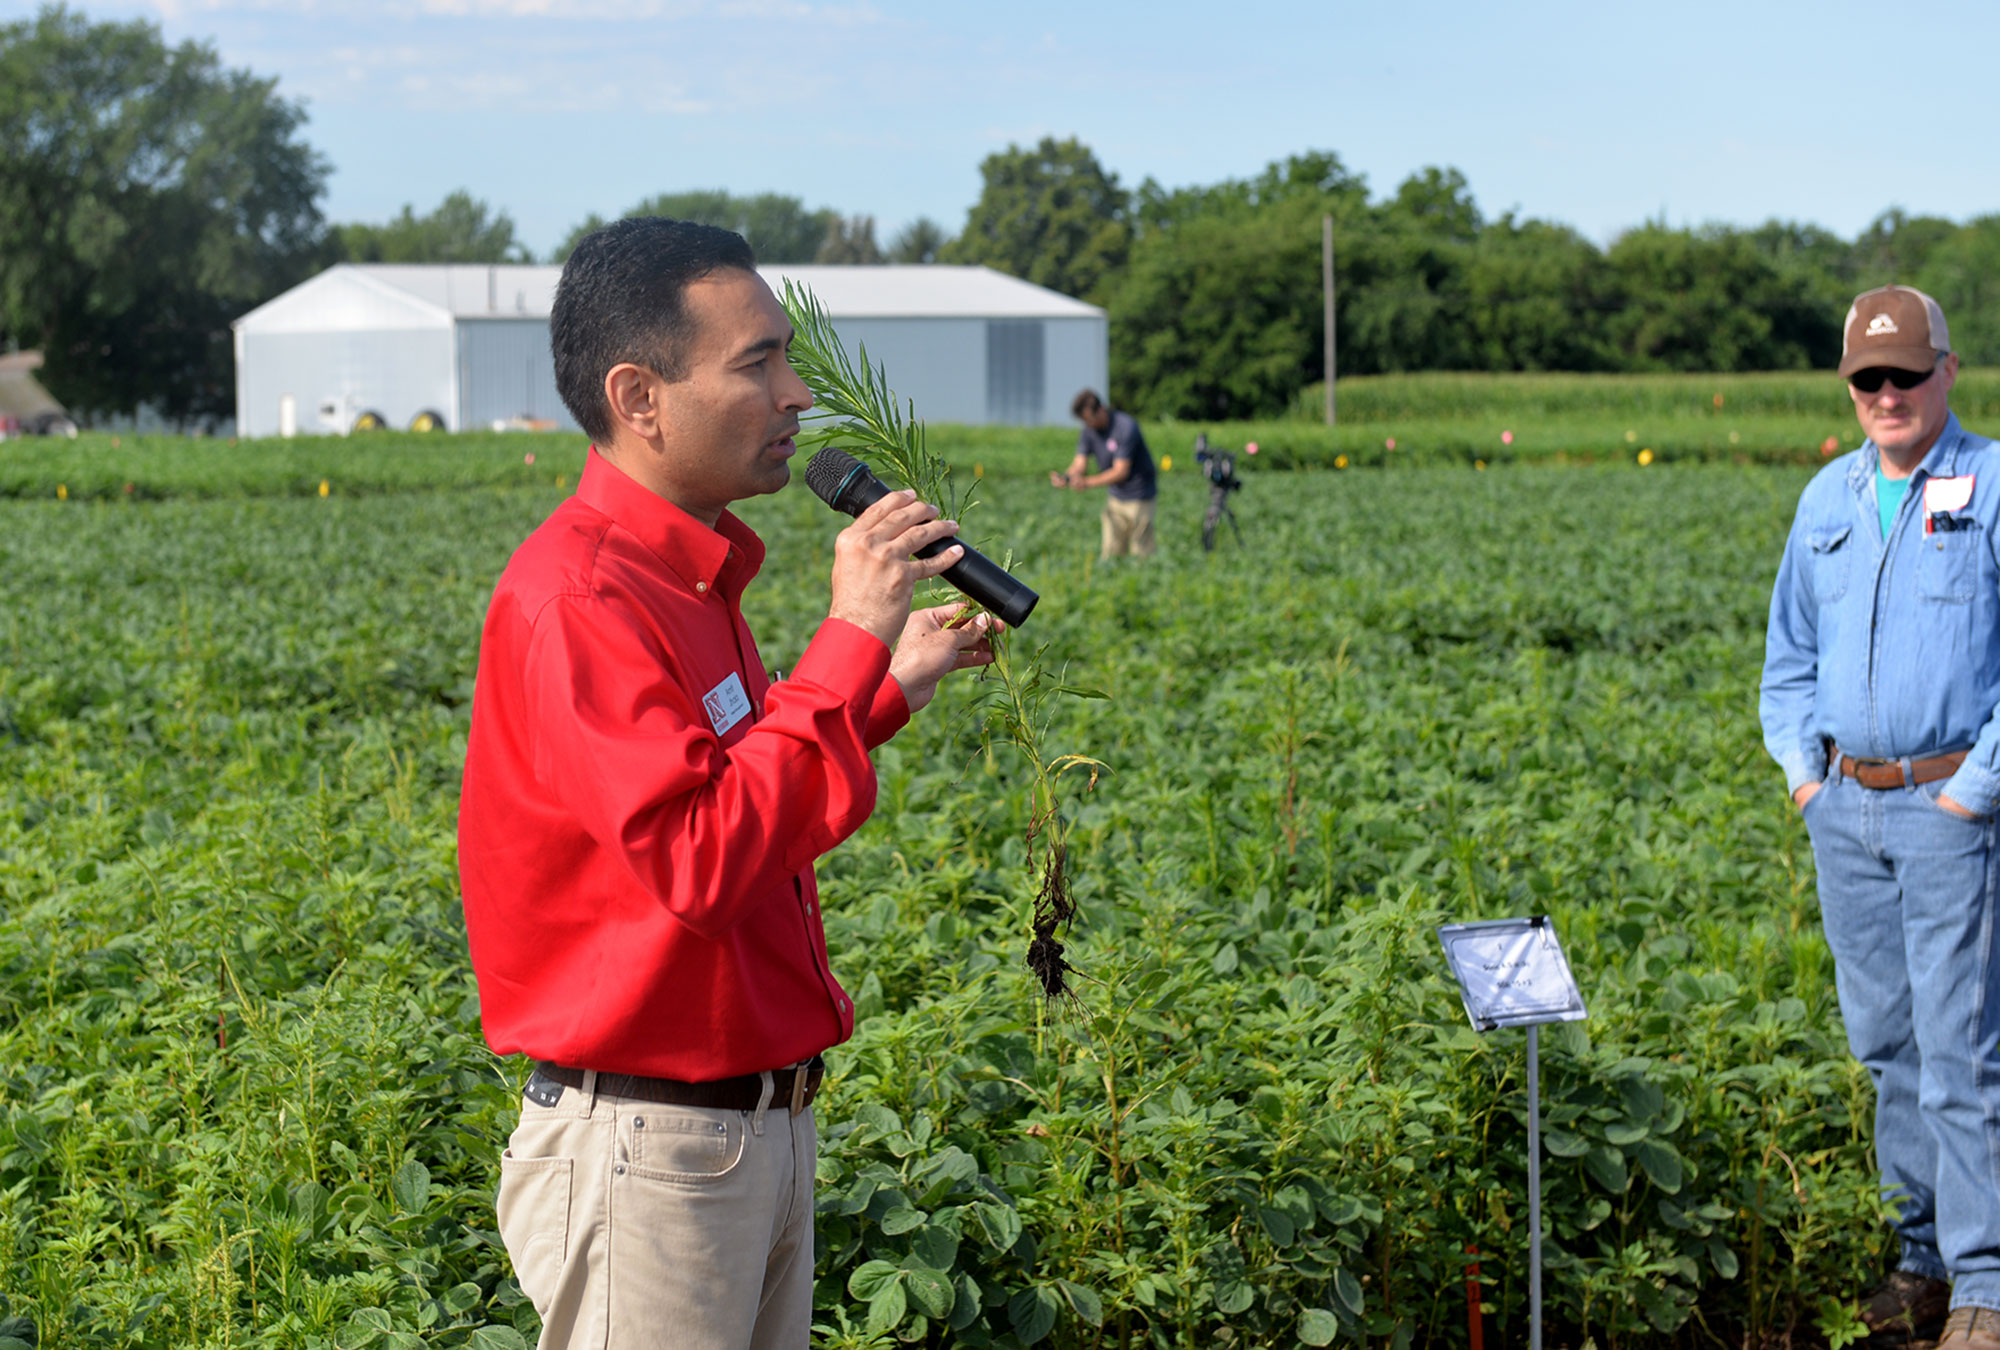   Amit Jhala, associate professor and Nebraska Extension weed management specialist, discusses a project for control of glyphosate-resistant marestail and Palmer amaranth in soybean during a field day July 10 near Carleton, Nebraska.